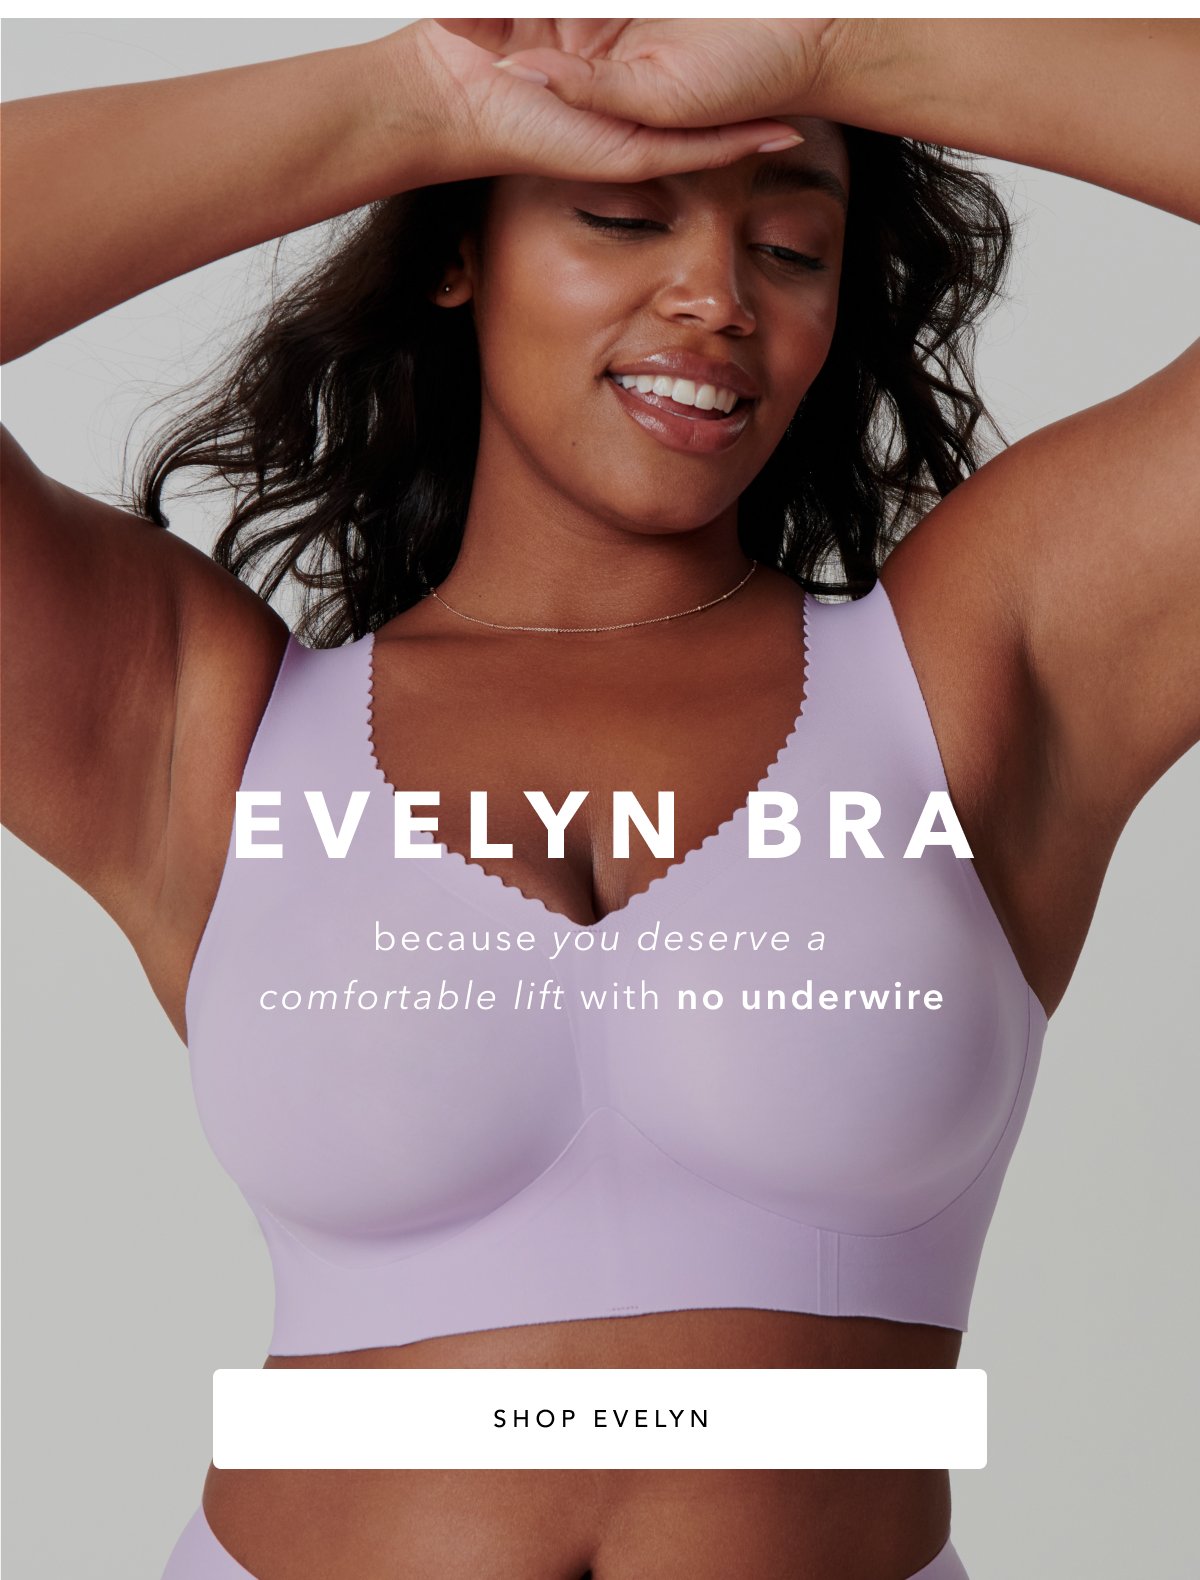 EVELYN BRA BECAUSE YOU DESERVE A COMFORTABLE LIFT WITH NO UNDERWIRE